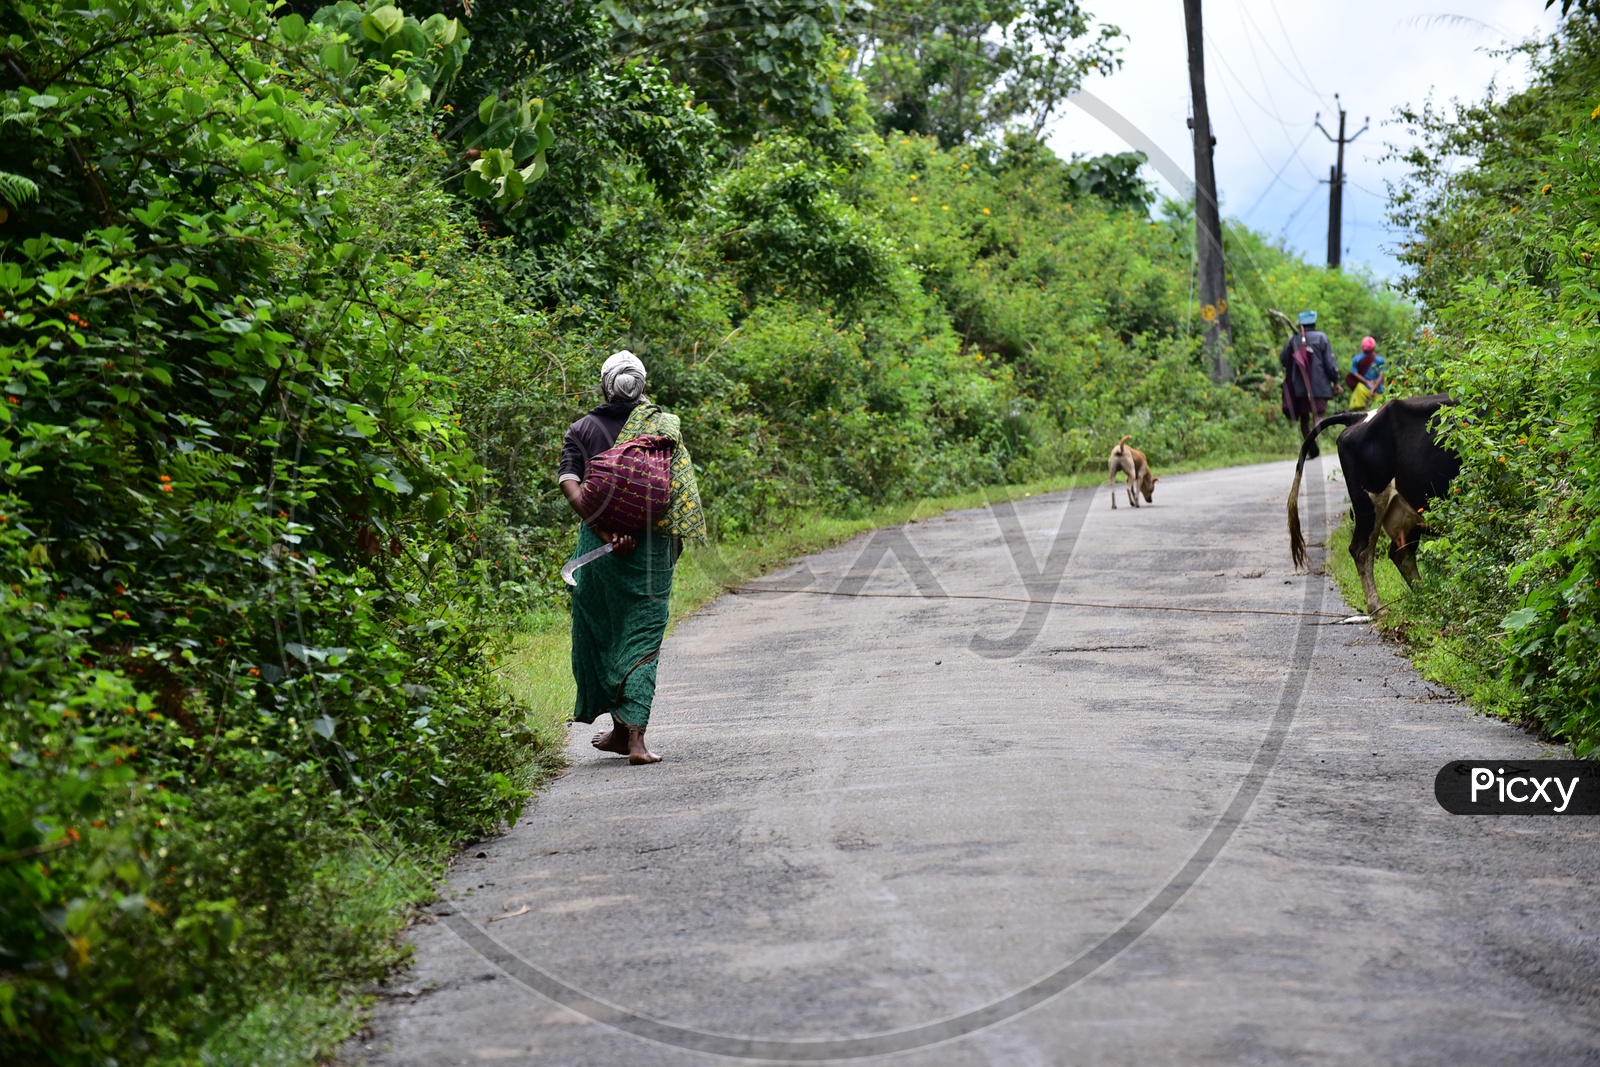 An Old Woman Walking Along The Road in Munnar As A Part Of her Daily Life With a Knife In Her Hand